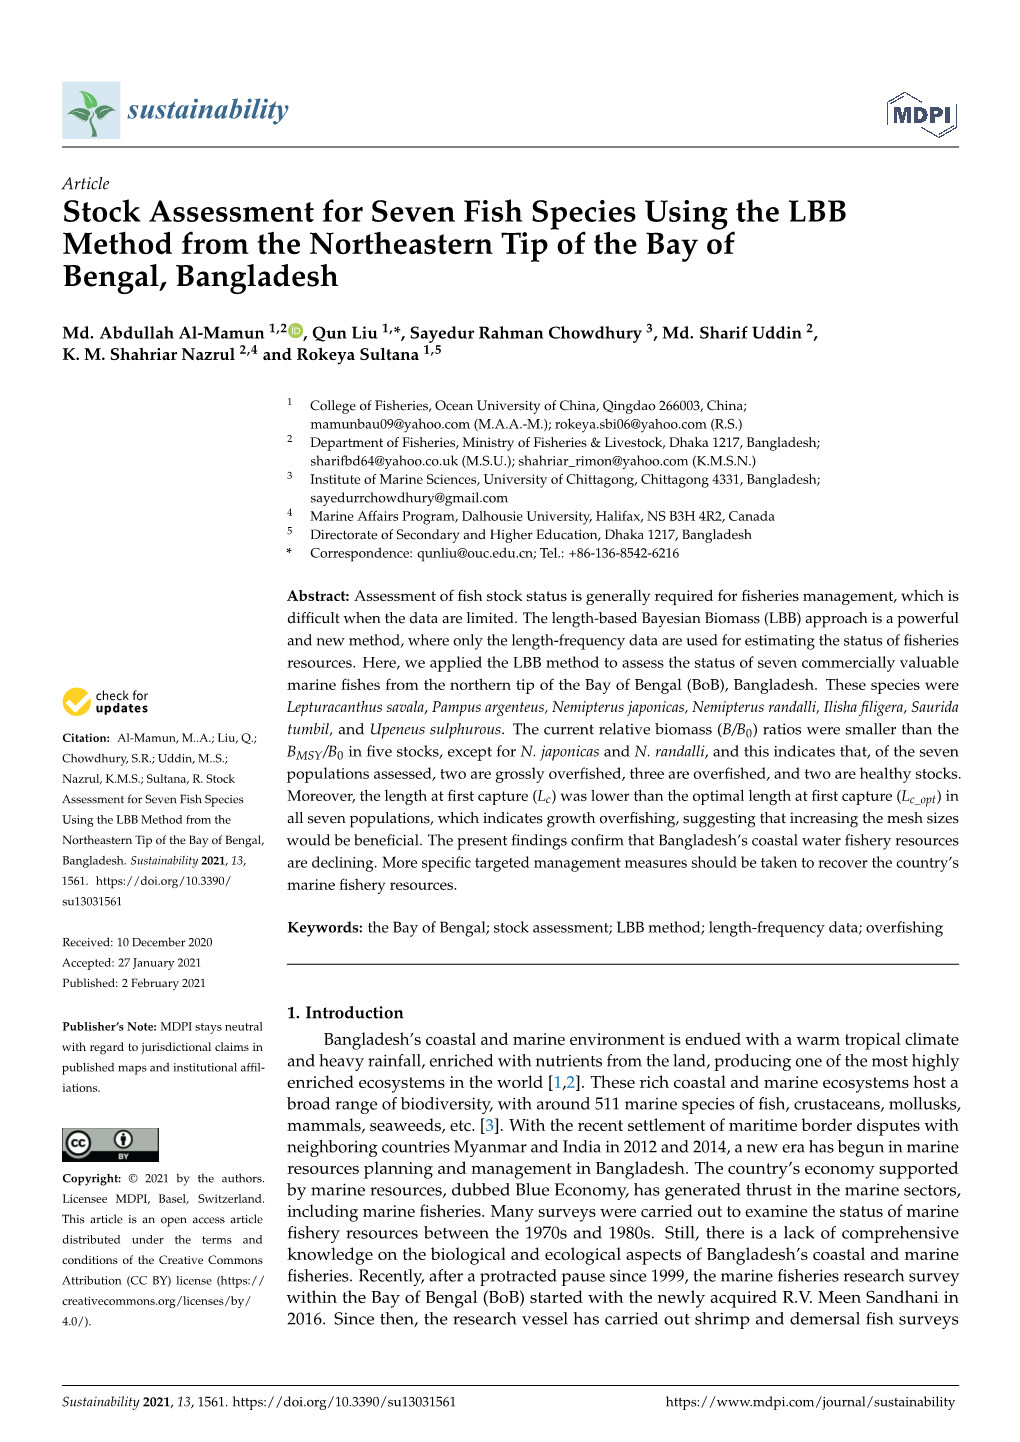 Stock Assessment for Seven Fish Species Using the LBB Method from the Northeastern Tip of the Bay of Bengal, Bangladesh